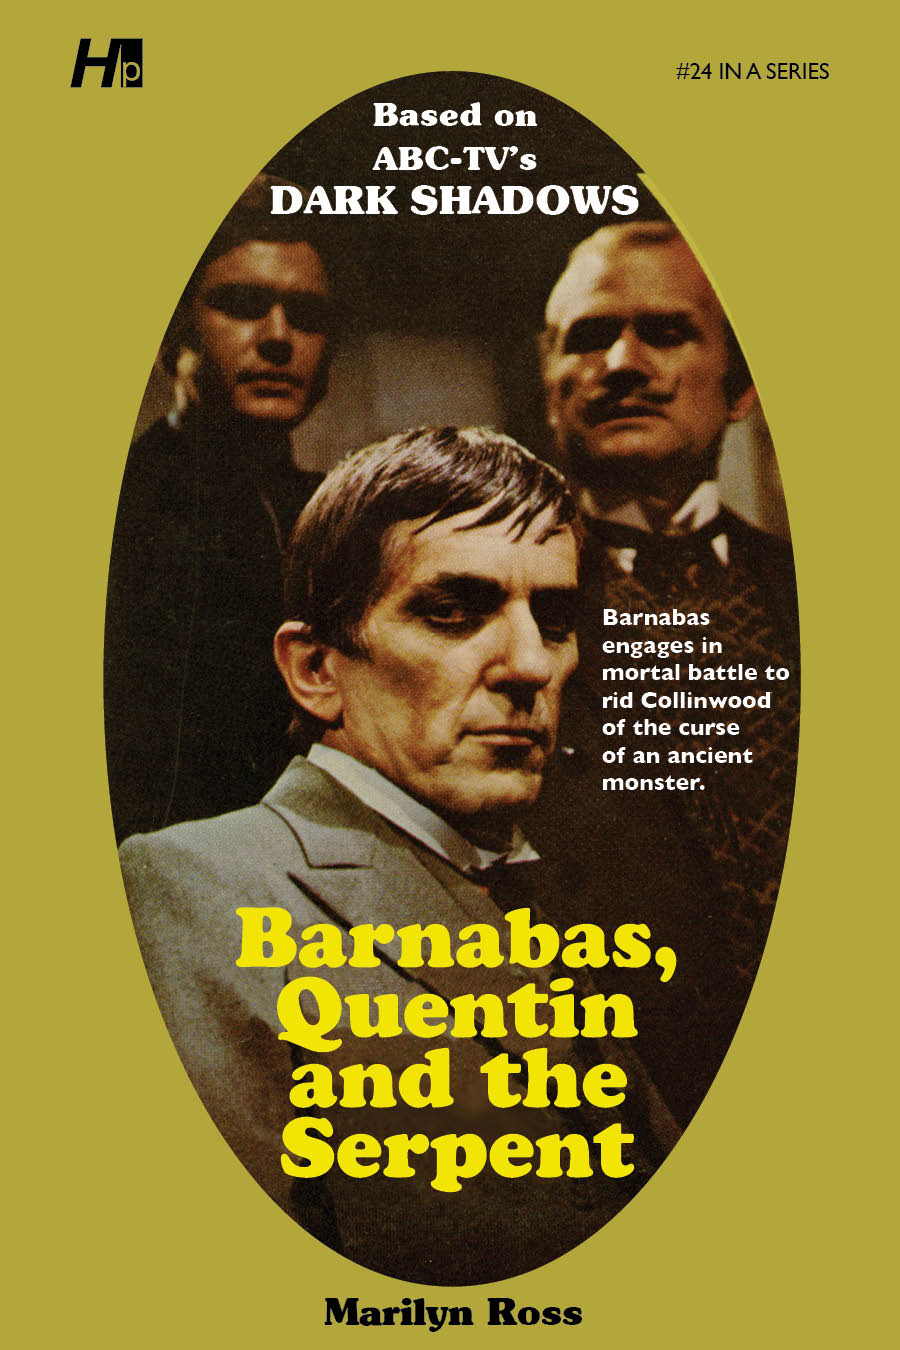 Dark Shadows #24: Barnabas, Quentin and the Serpent [Paperback]